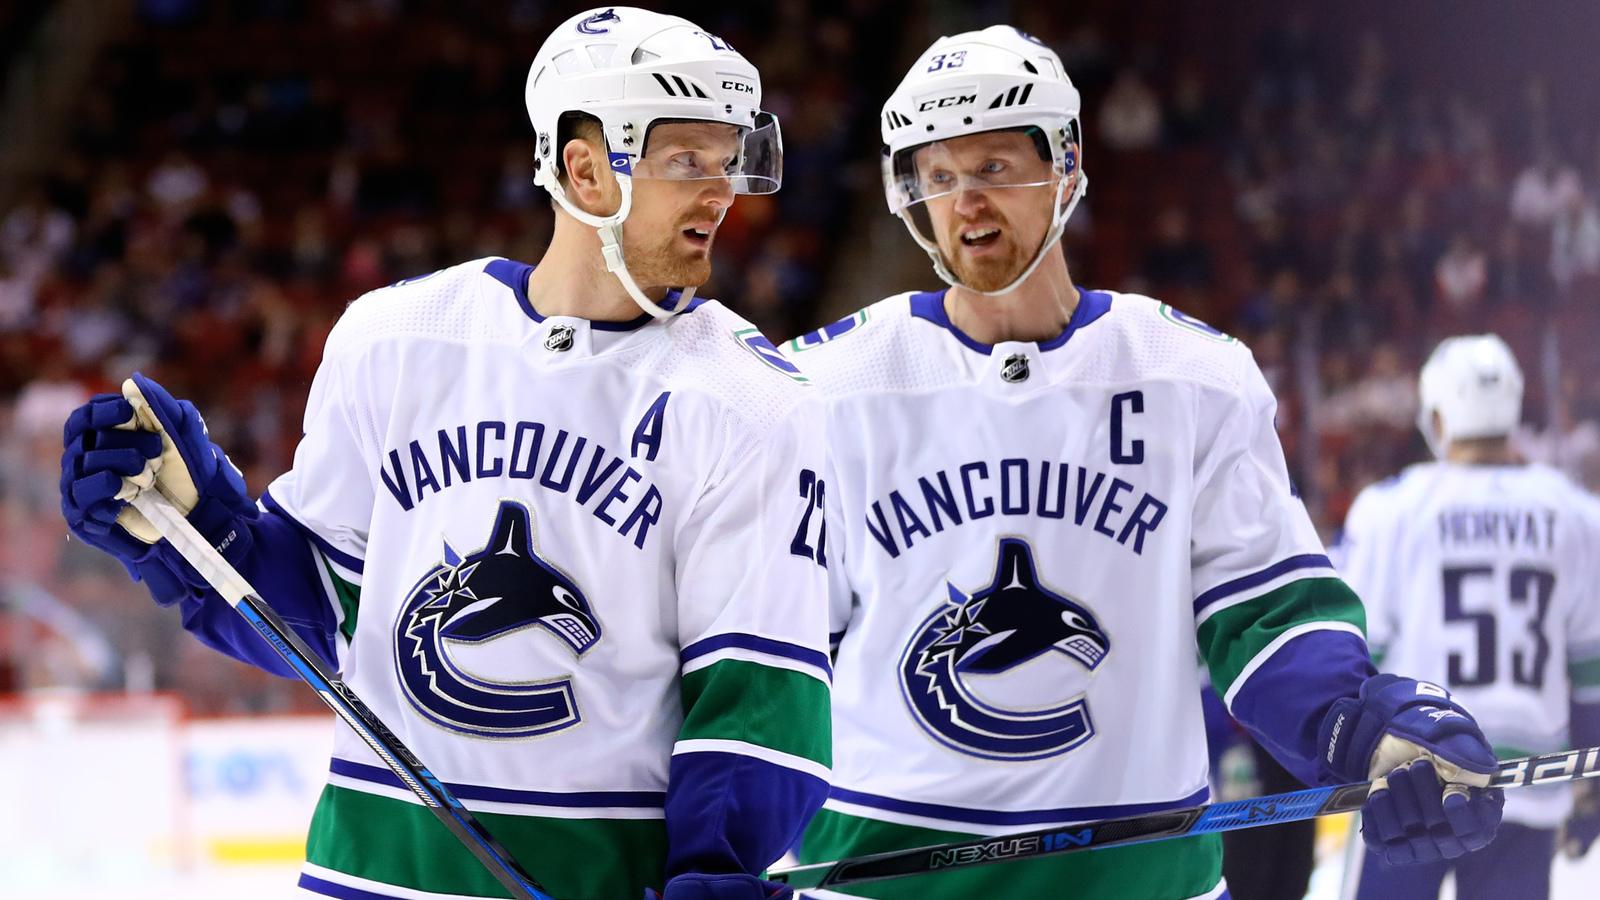 Vancouver Canucks to retire Sedins' numbers